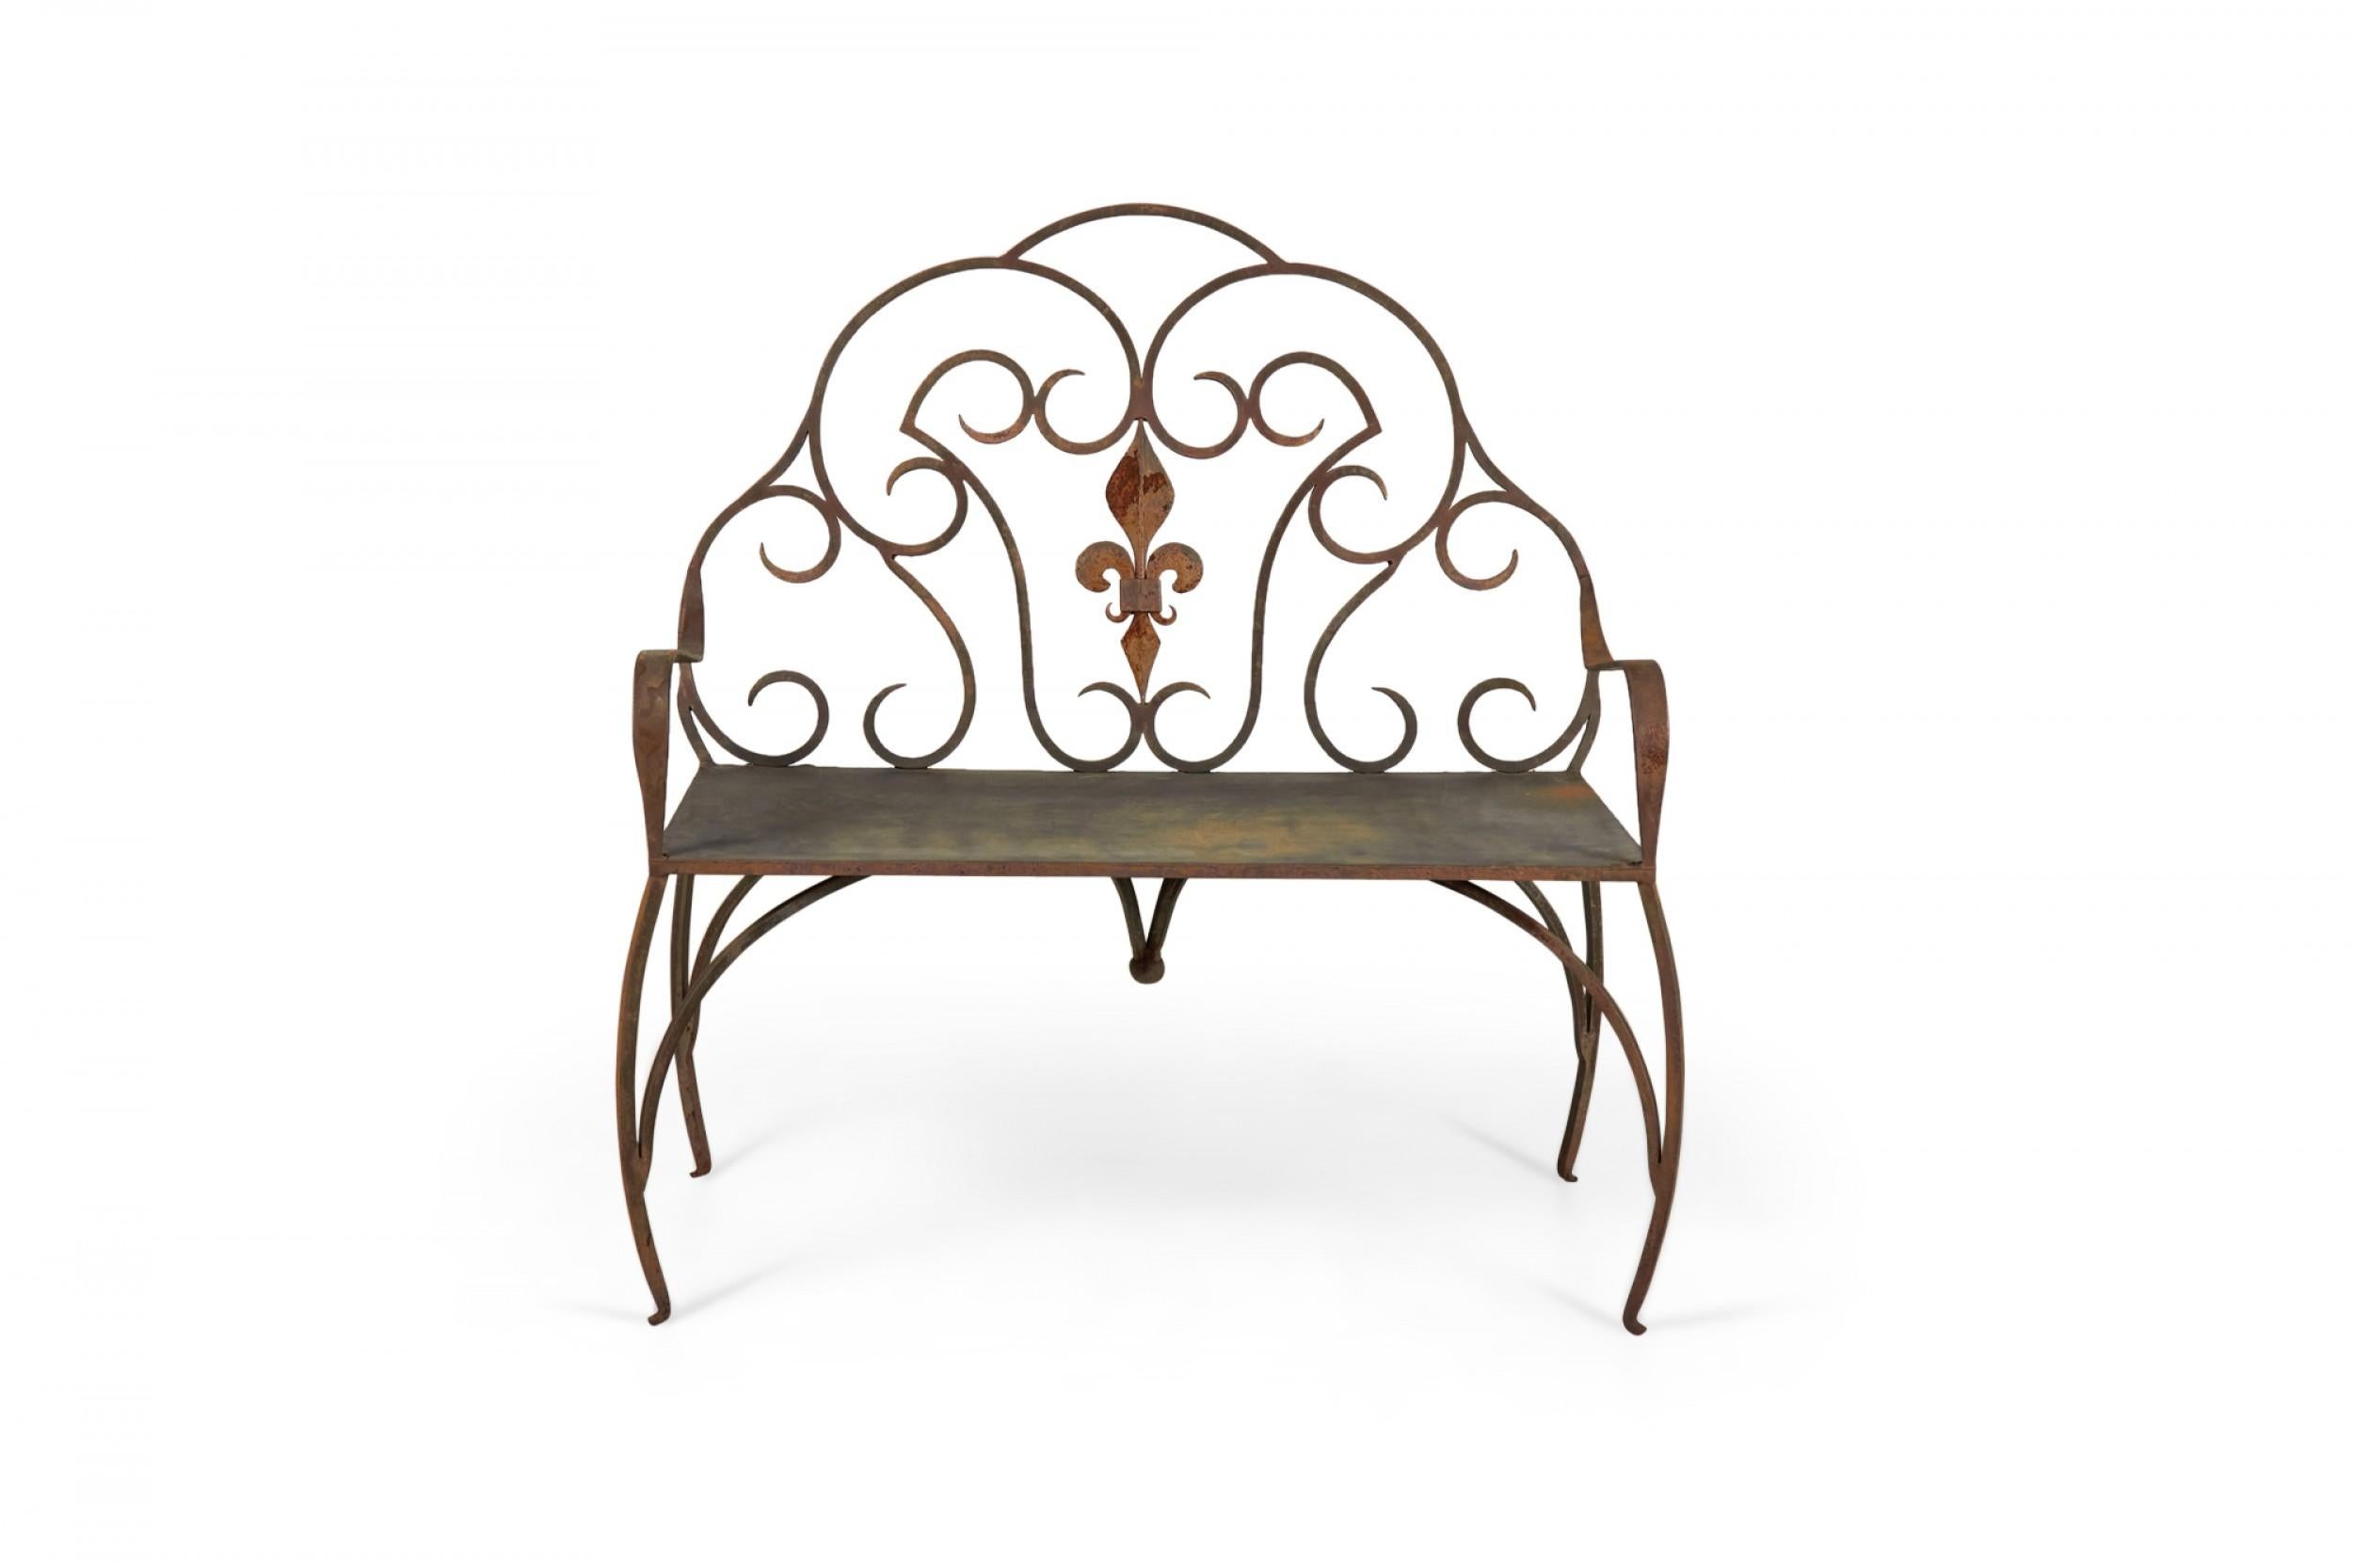 Jan Barboglio Mexican Modern Style Wrought Iron Outdoor Fleur de Lis Crest Bench For Sale 2